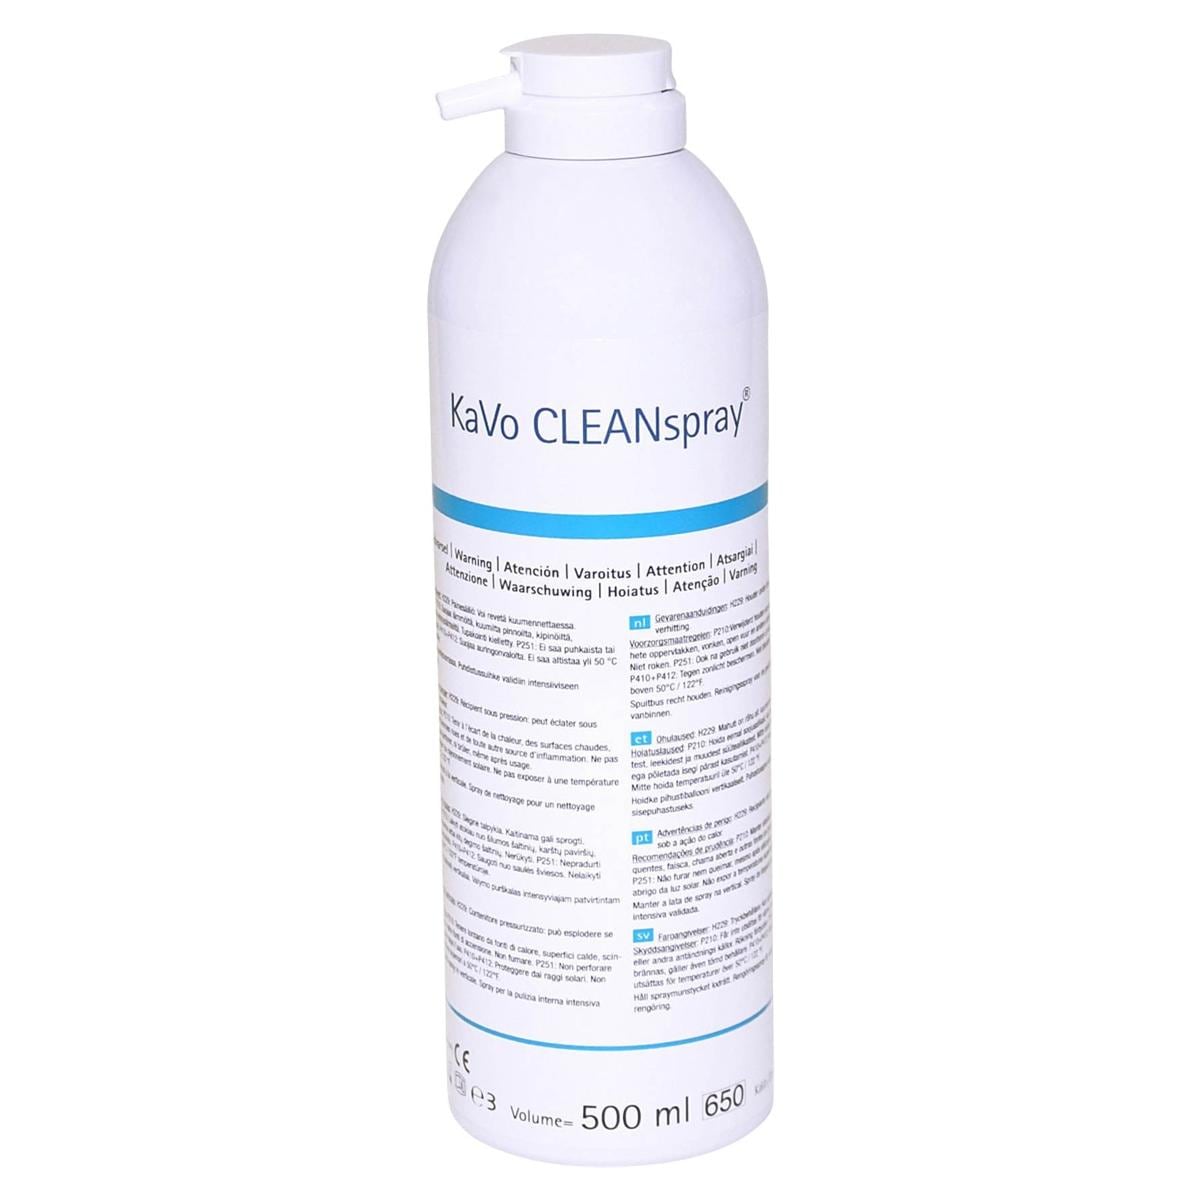 KaVo CLEANspray - Dose 500 ml